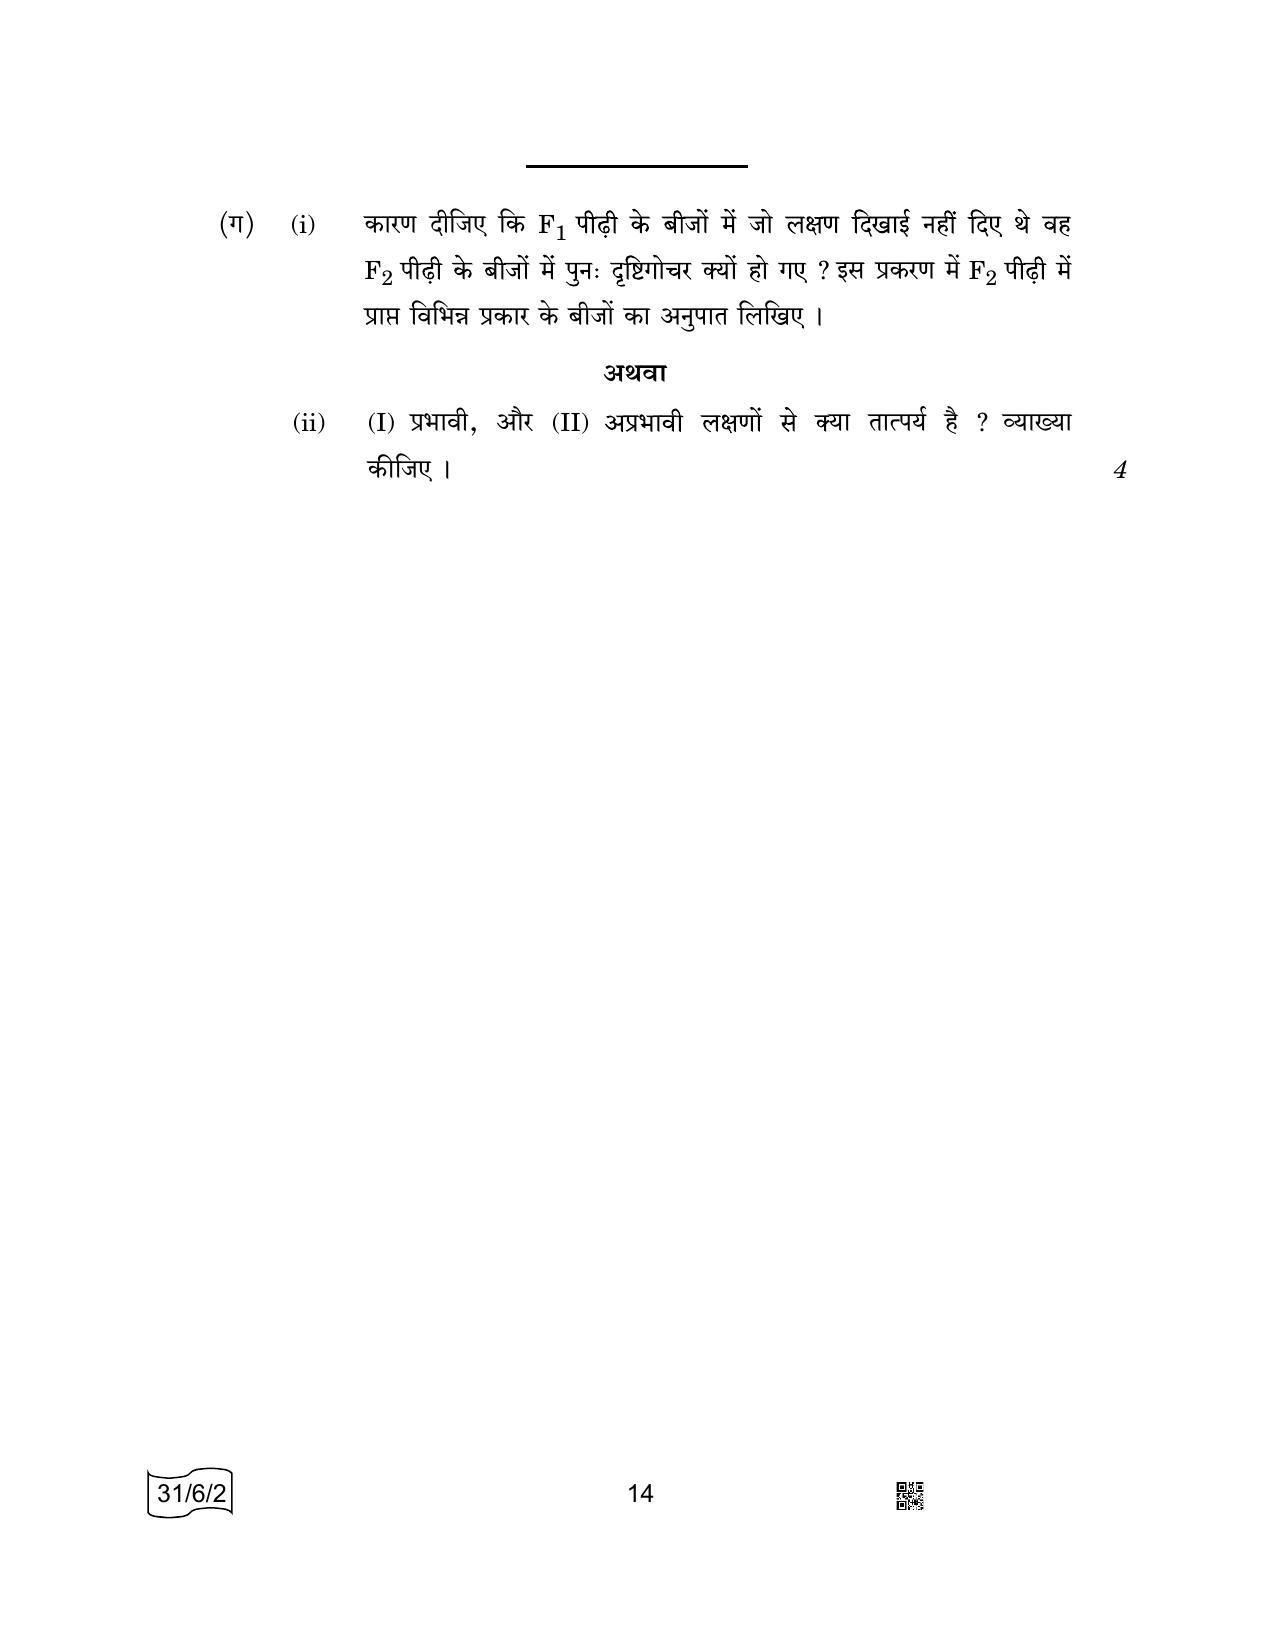 CBSE Class 10 31-6-2 SCIENCE 2022 Compartment Question Paper - Page 14